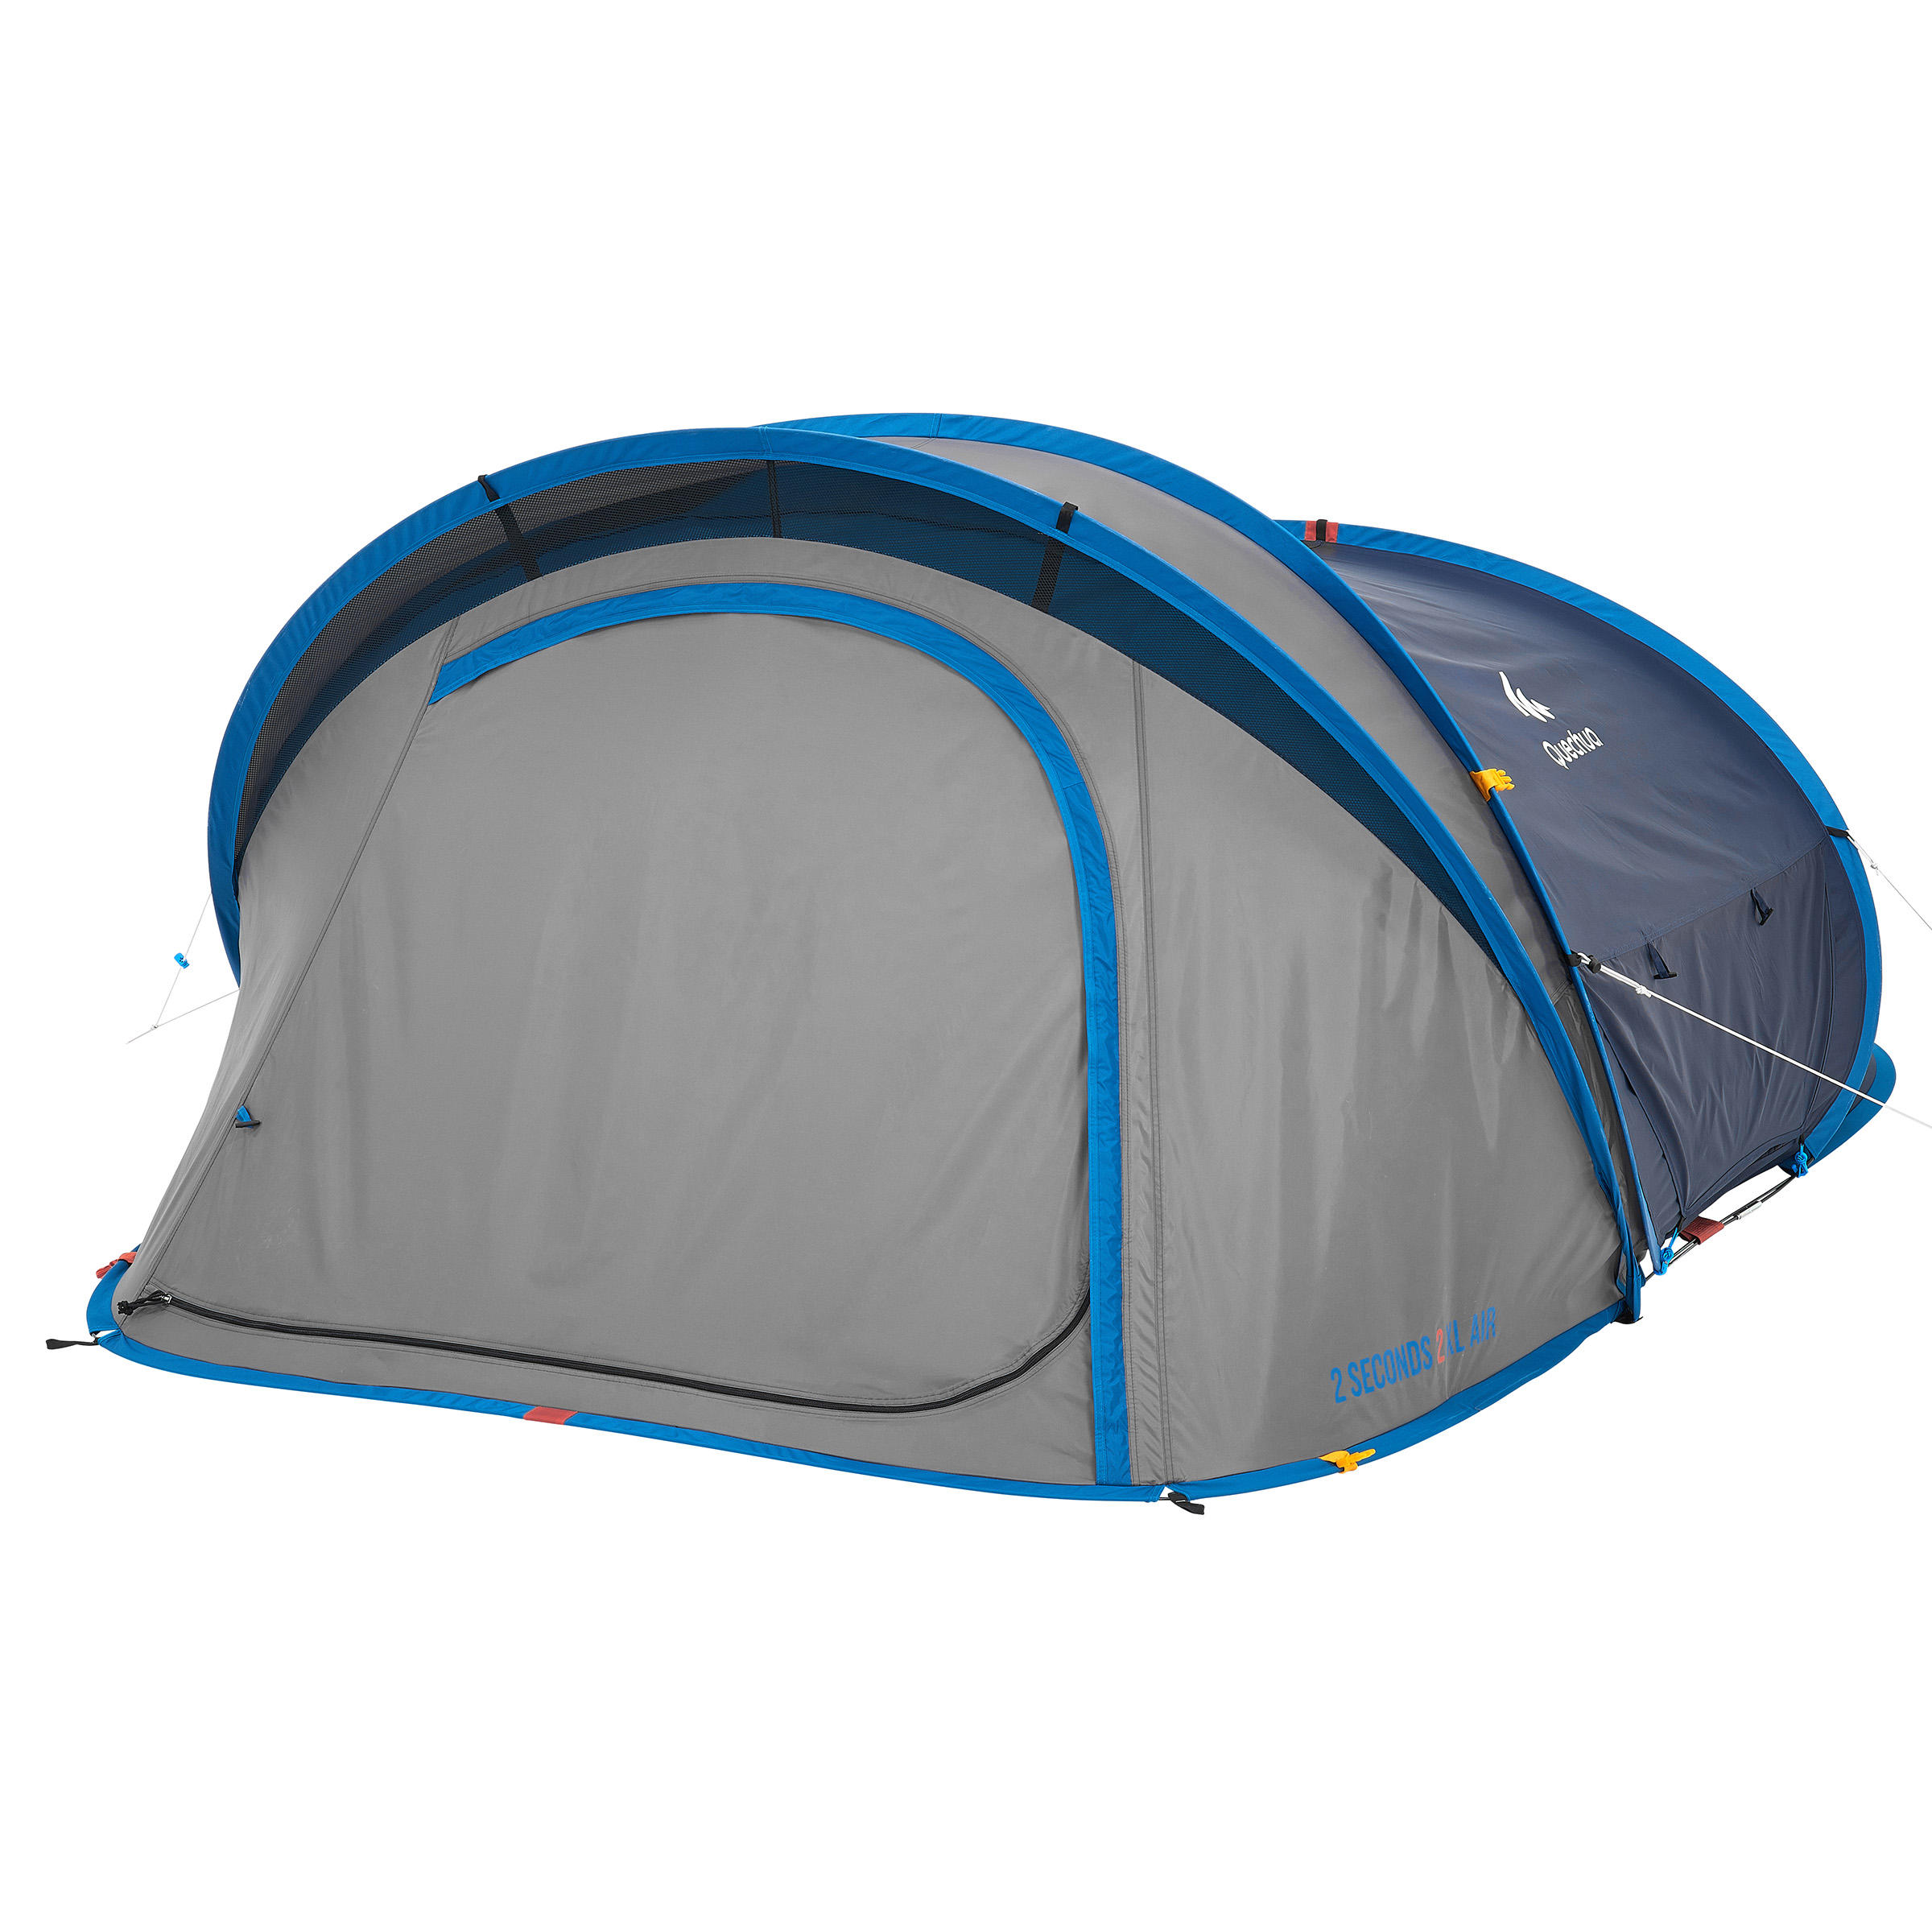 2 Seconds 2 XL Air Tent Flysheet and Poles 1/1